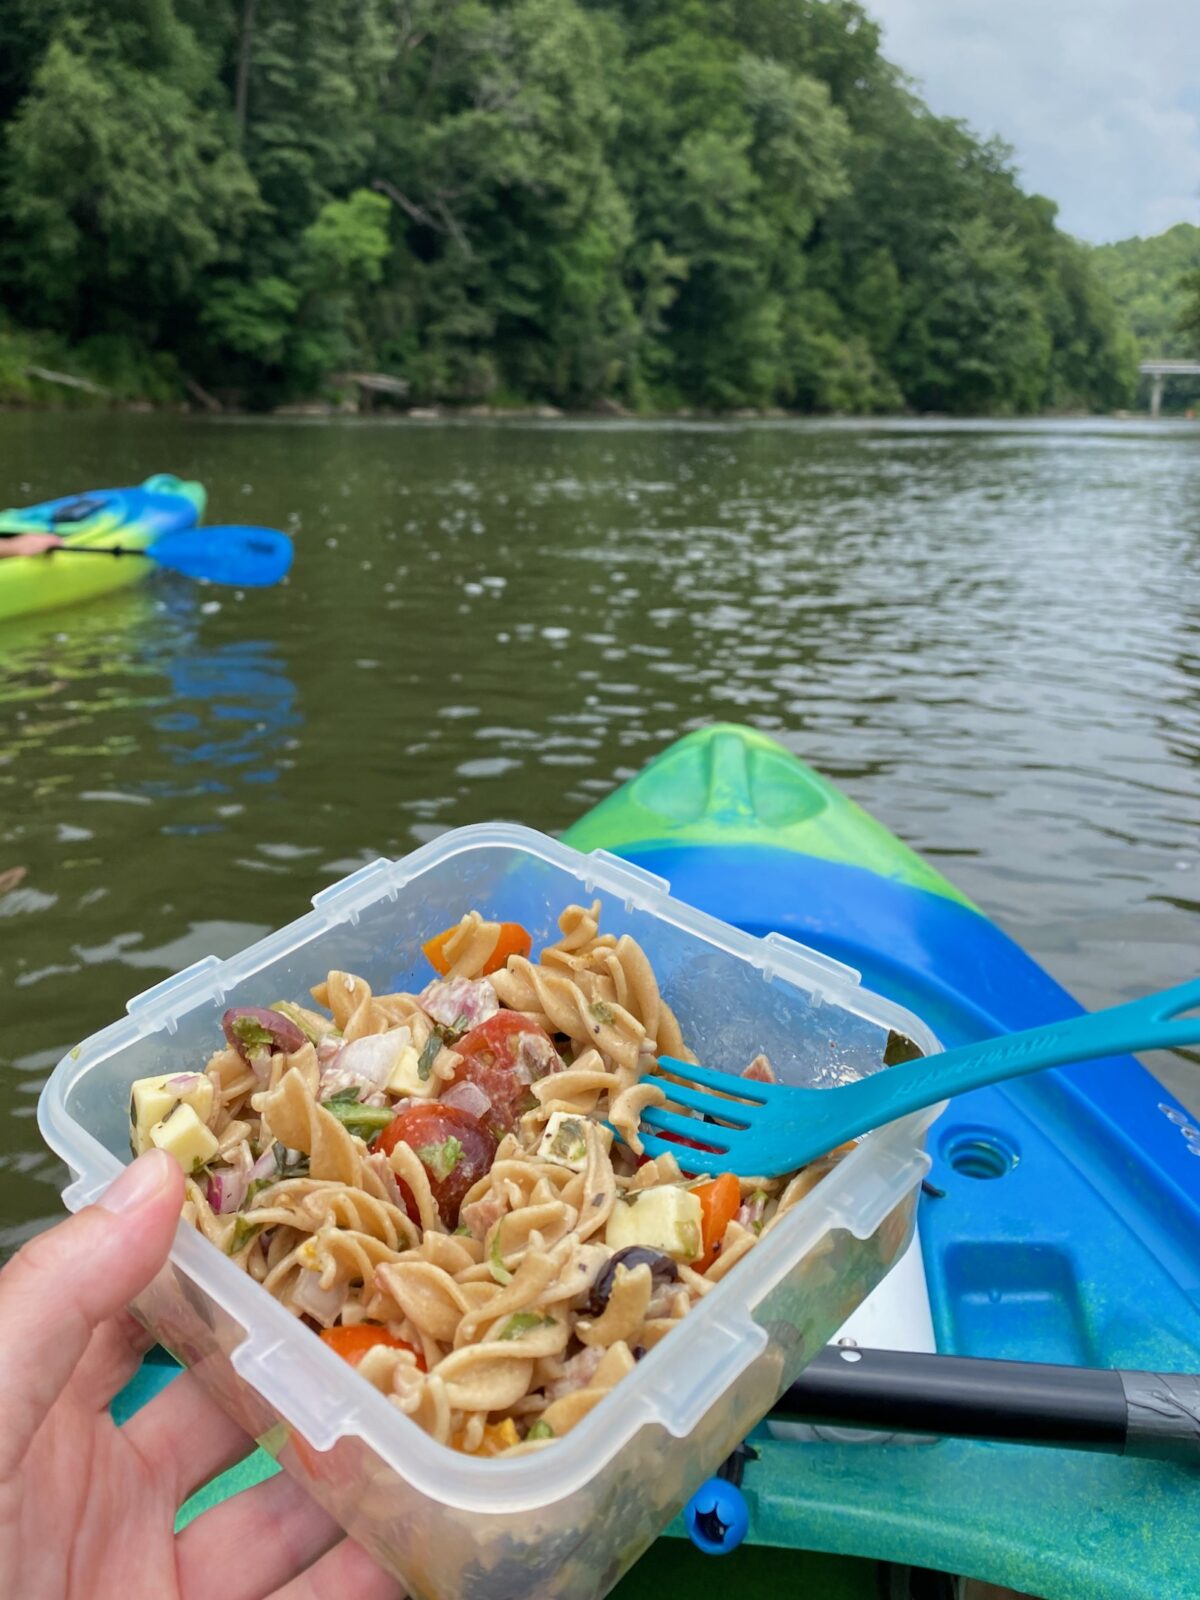 Holding a container of pasta salad while sitting in a kayak on the water from a persons viewpoint. 